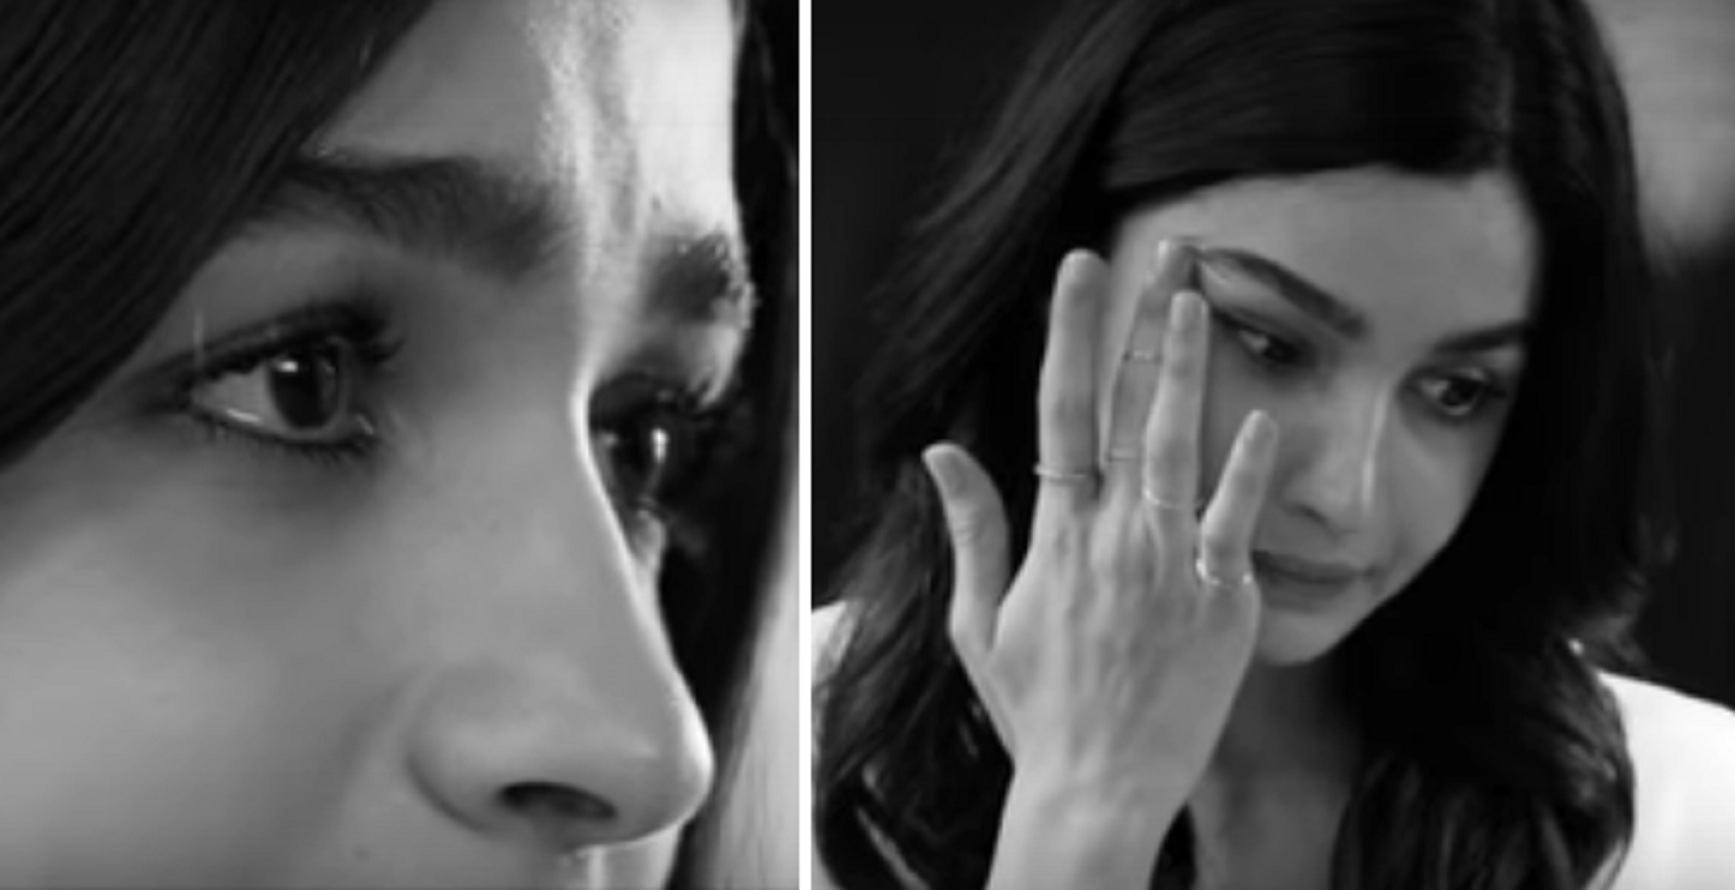 Alia Bhatt Gets Emotional In Video Msg To Sister, For Not Understanding Her Moments of Depression